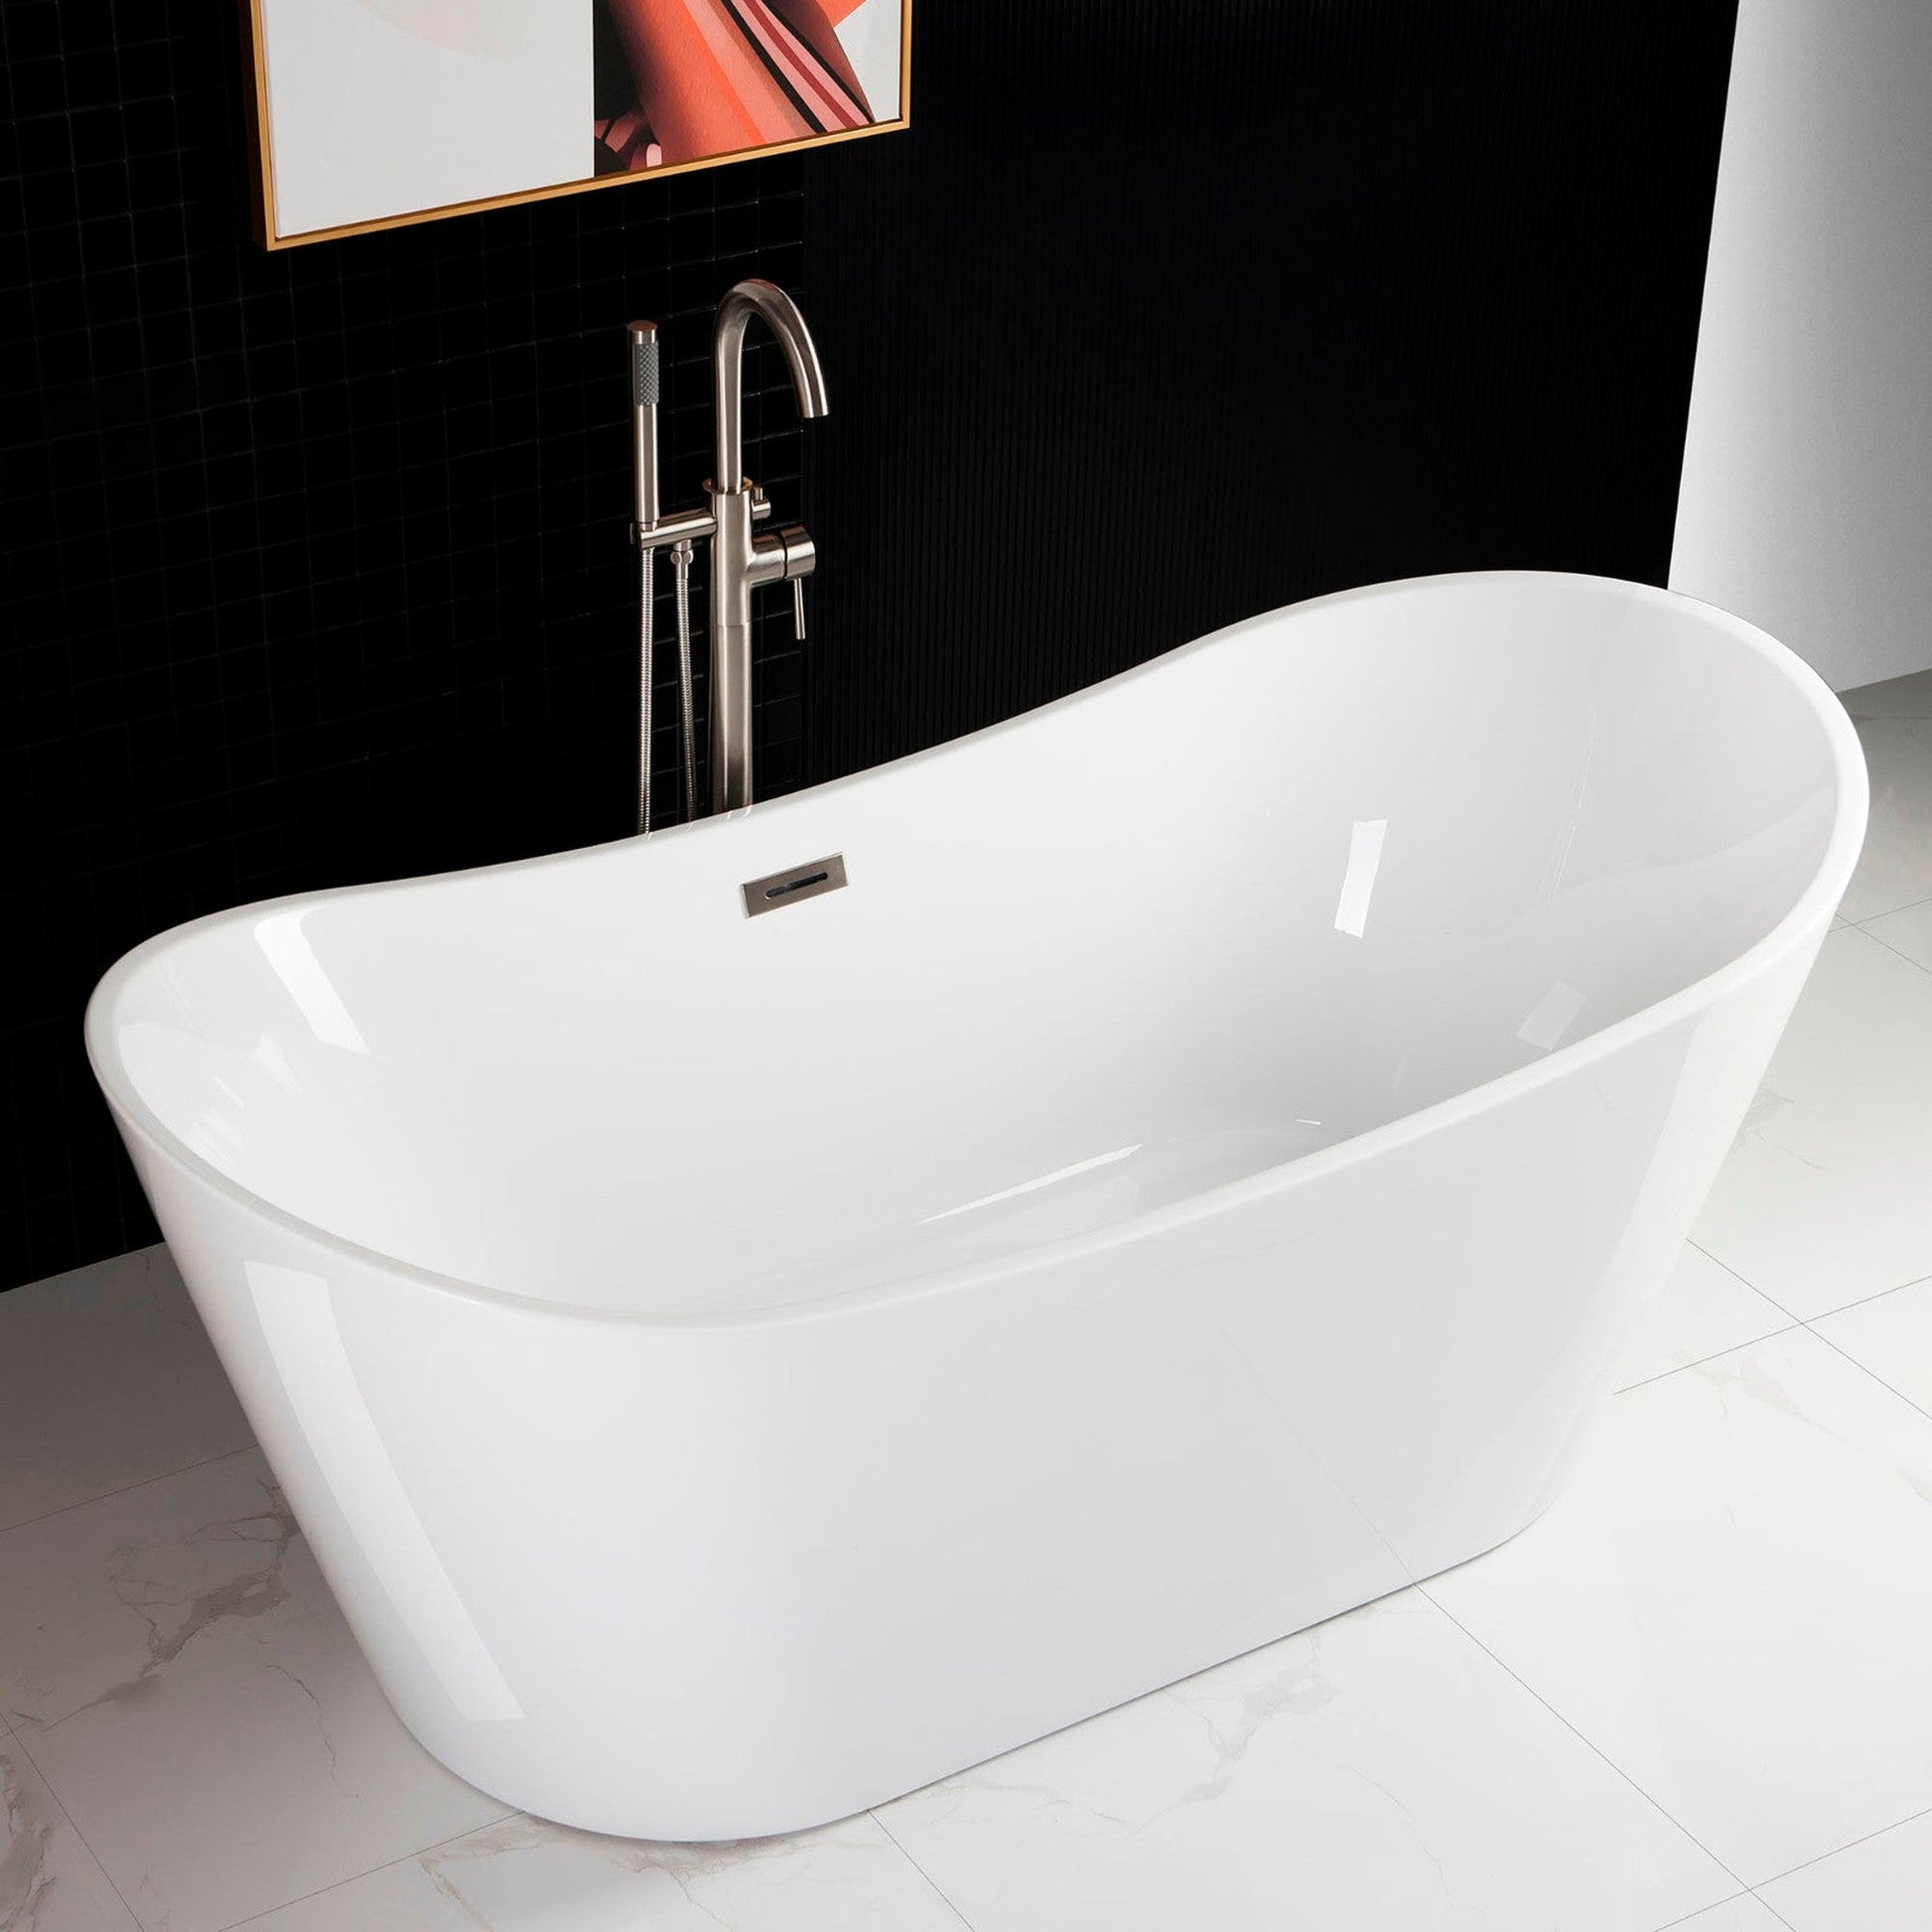 WoodBridge B0010 67" White Acrylic Freestanding Contemporary Soaking Bathtub With Chrome Drain, Overflow, F0071CHSQ Tub Filler and Caddy Tray